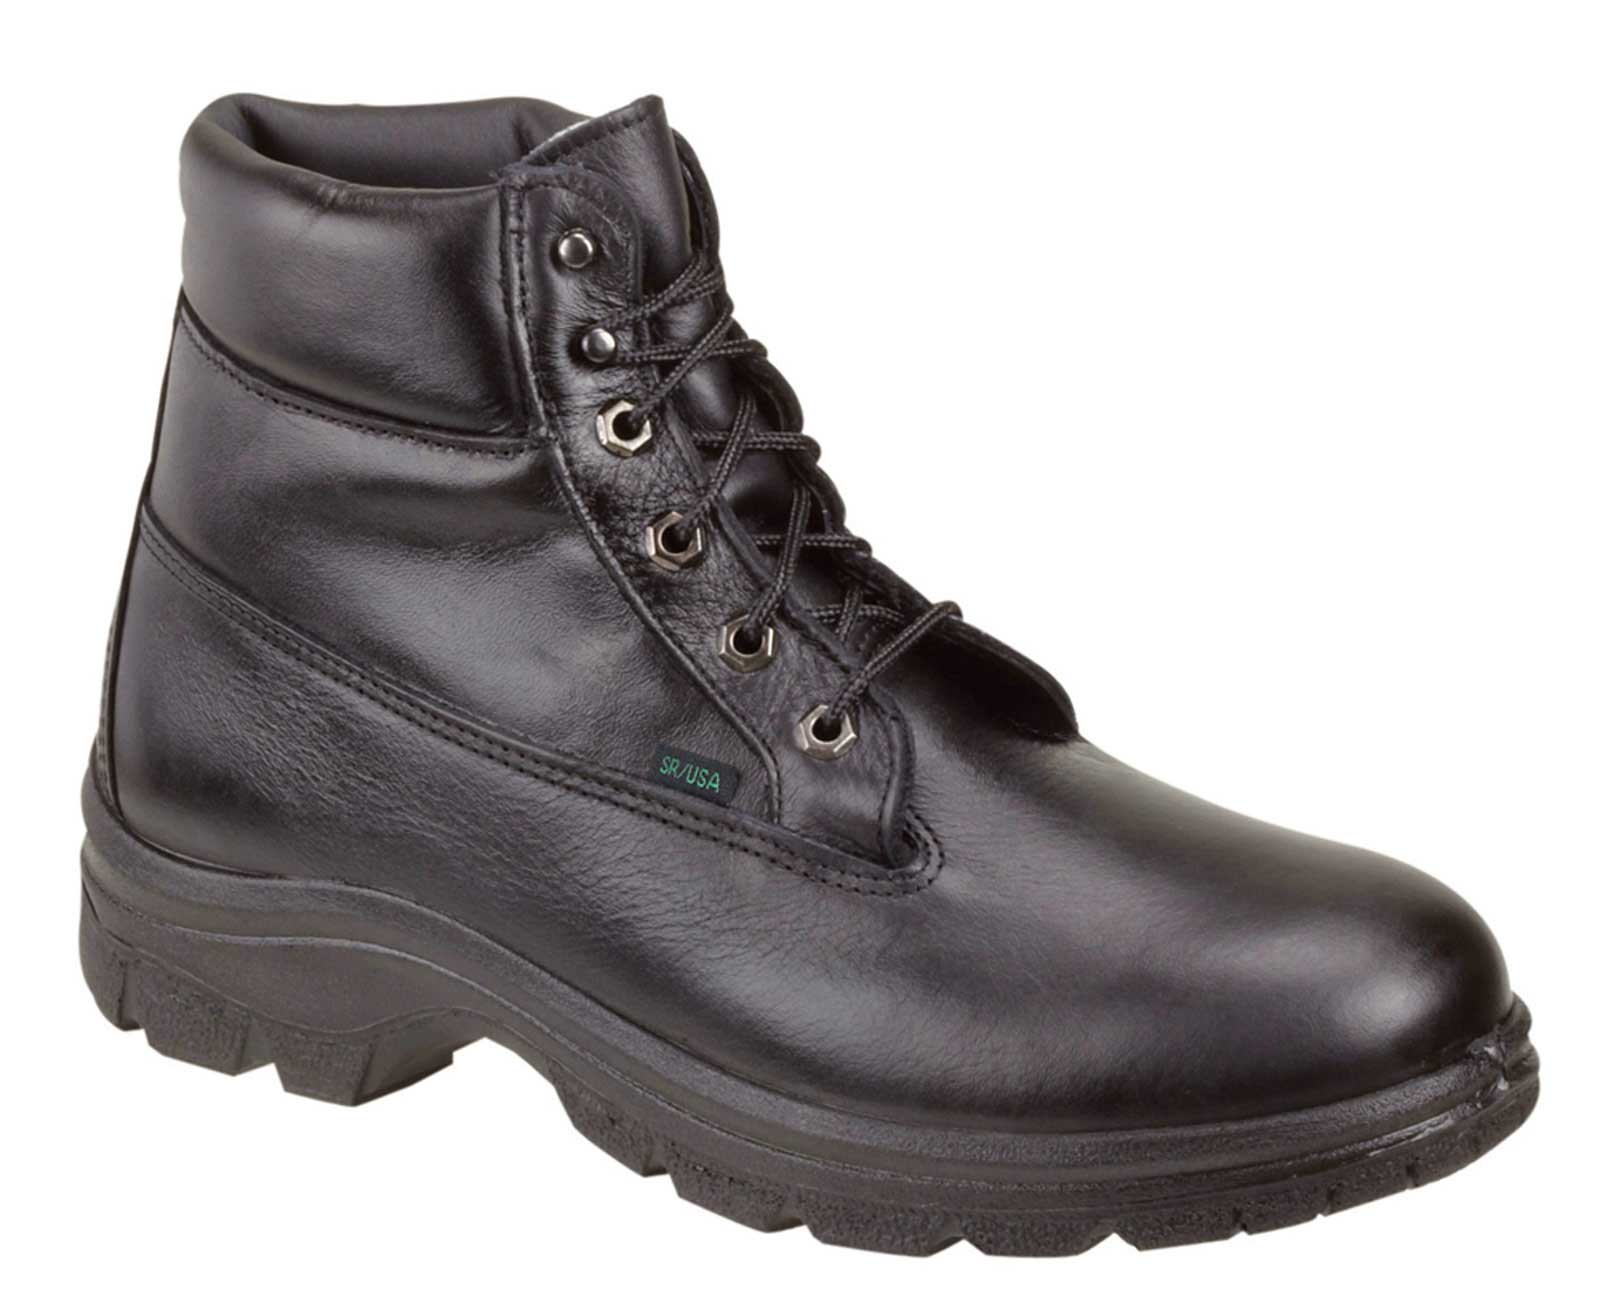 black insulated work boots